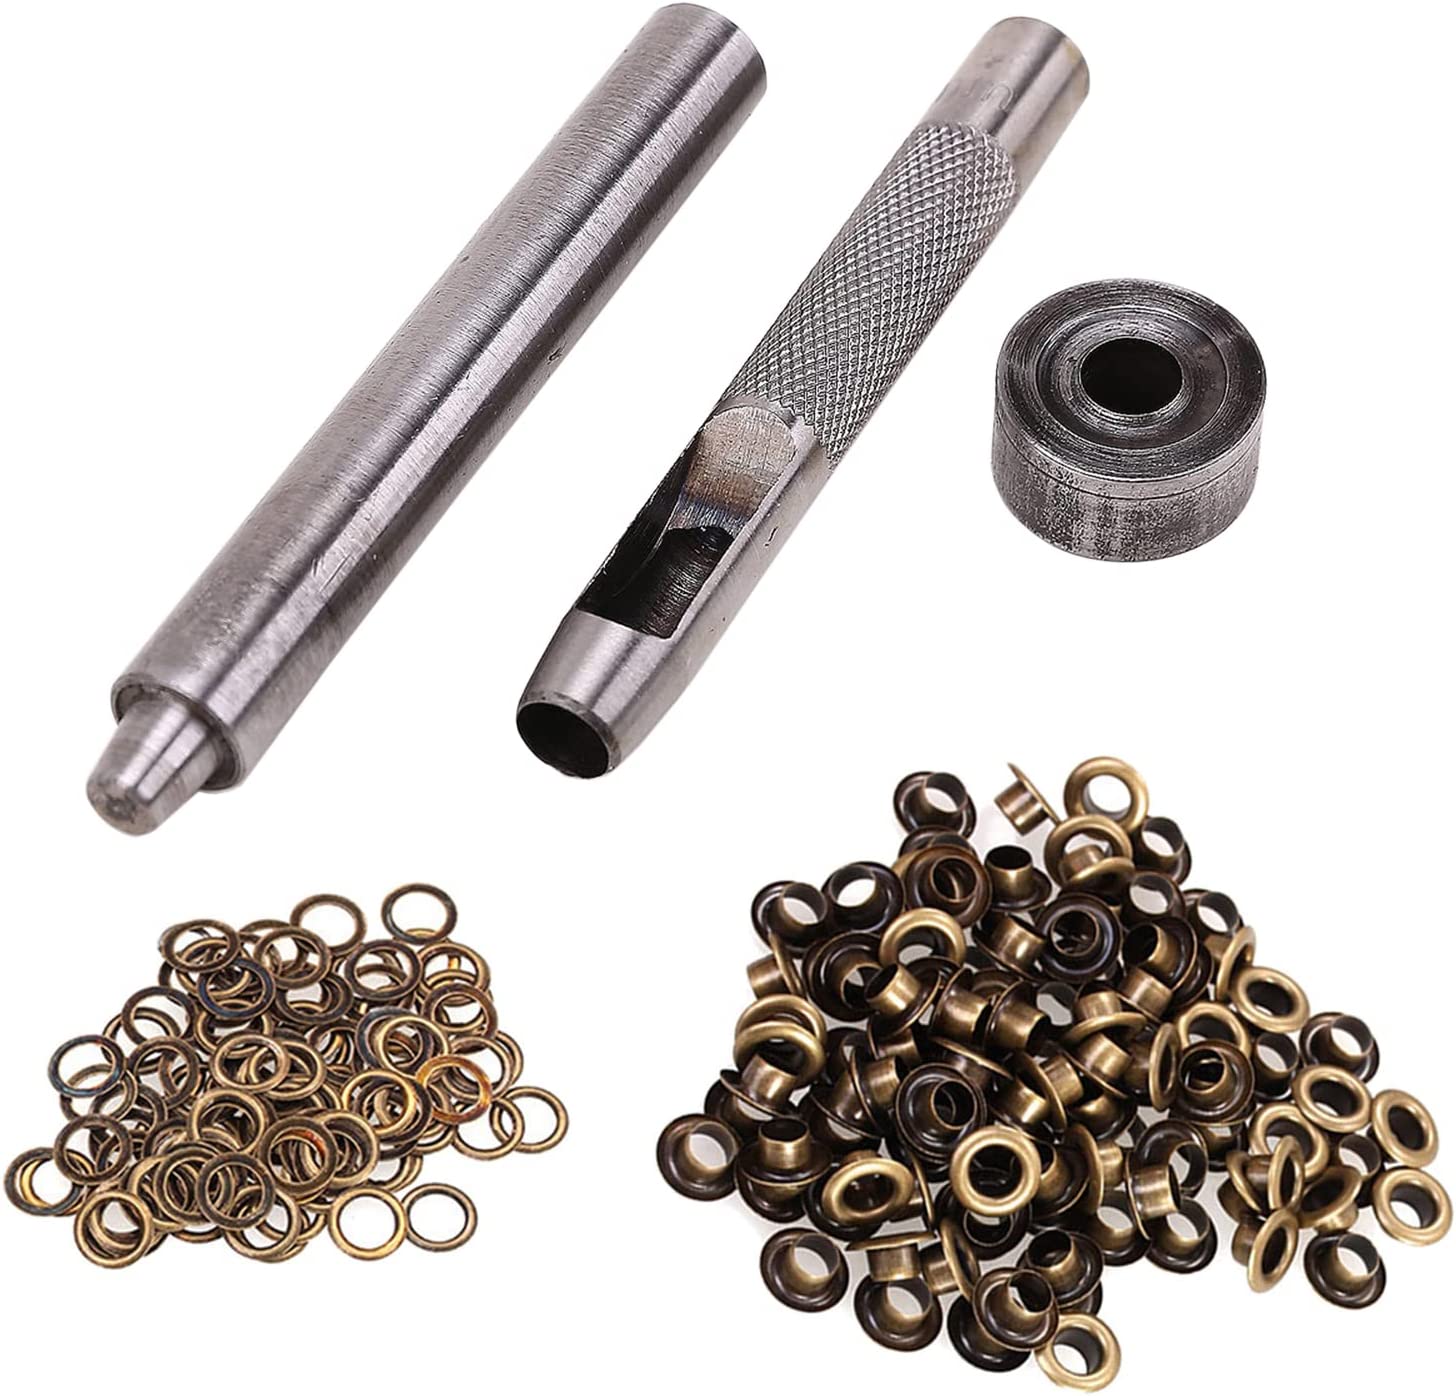 Trimming Shop 100 Set 5mm Eyelets Grommet with 3 Grommet Setting Tool  Eyelet Punch Kit for Leather, Fabric, Shoes, Handbag, Purses, Repair  Clothing